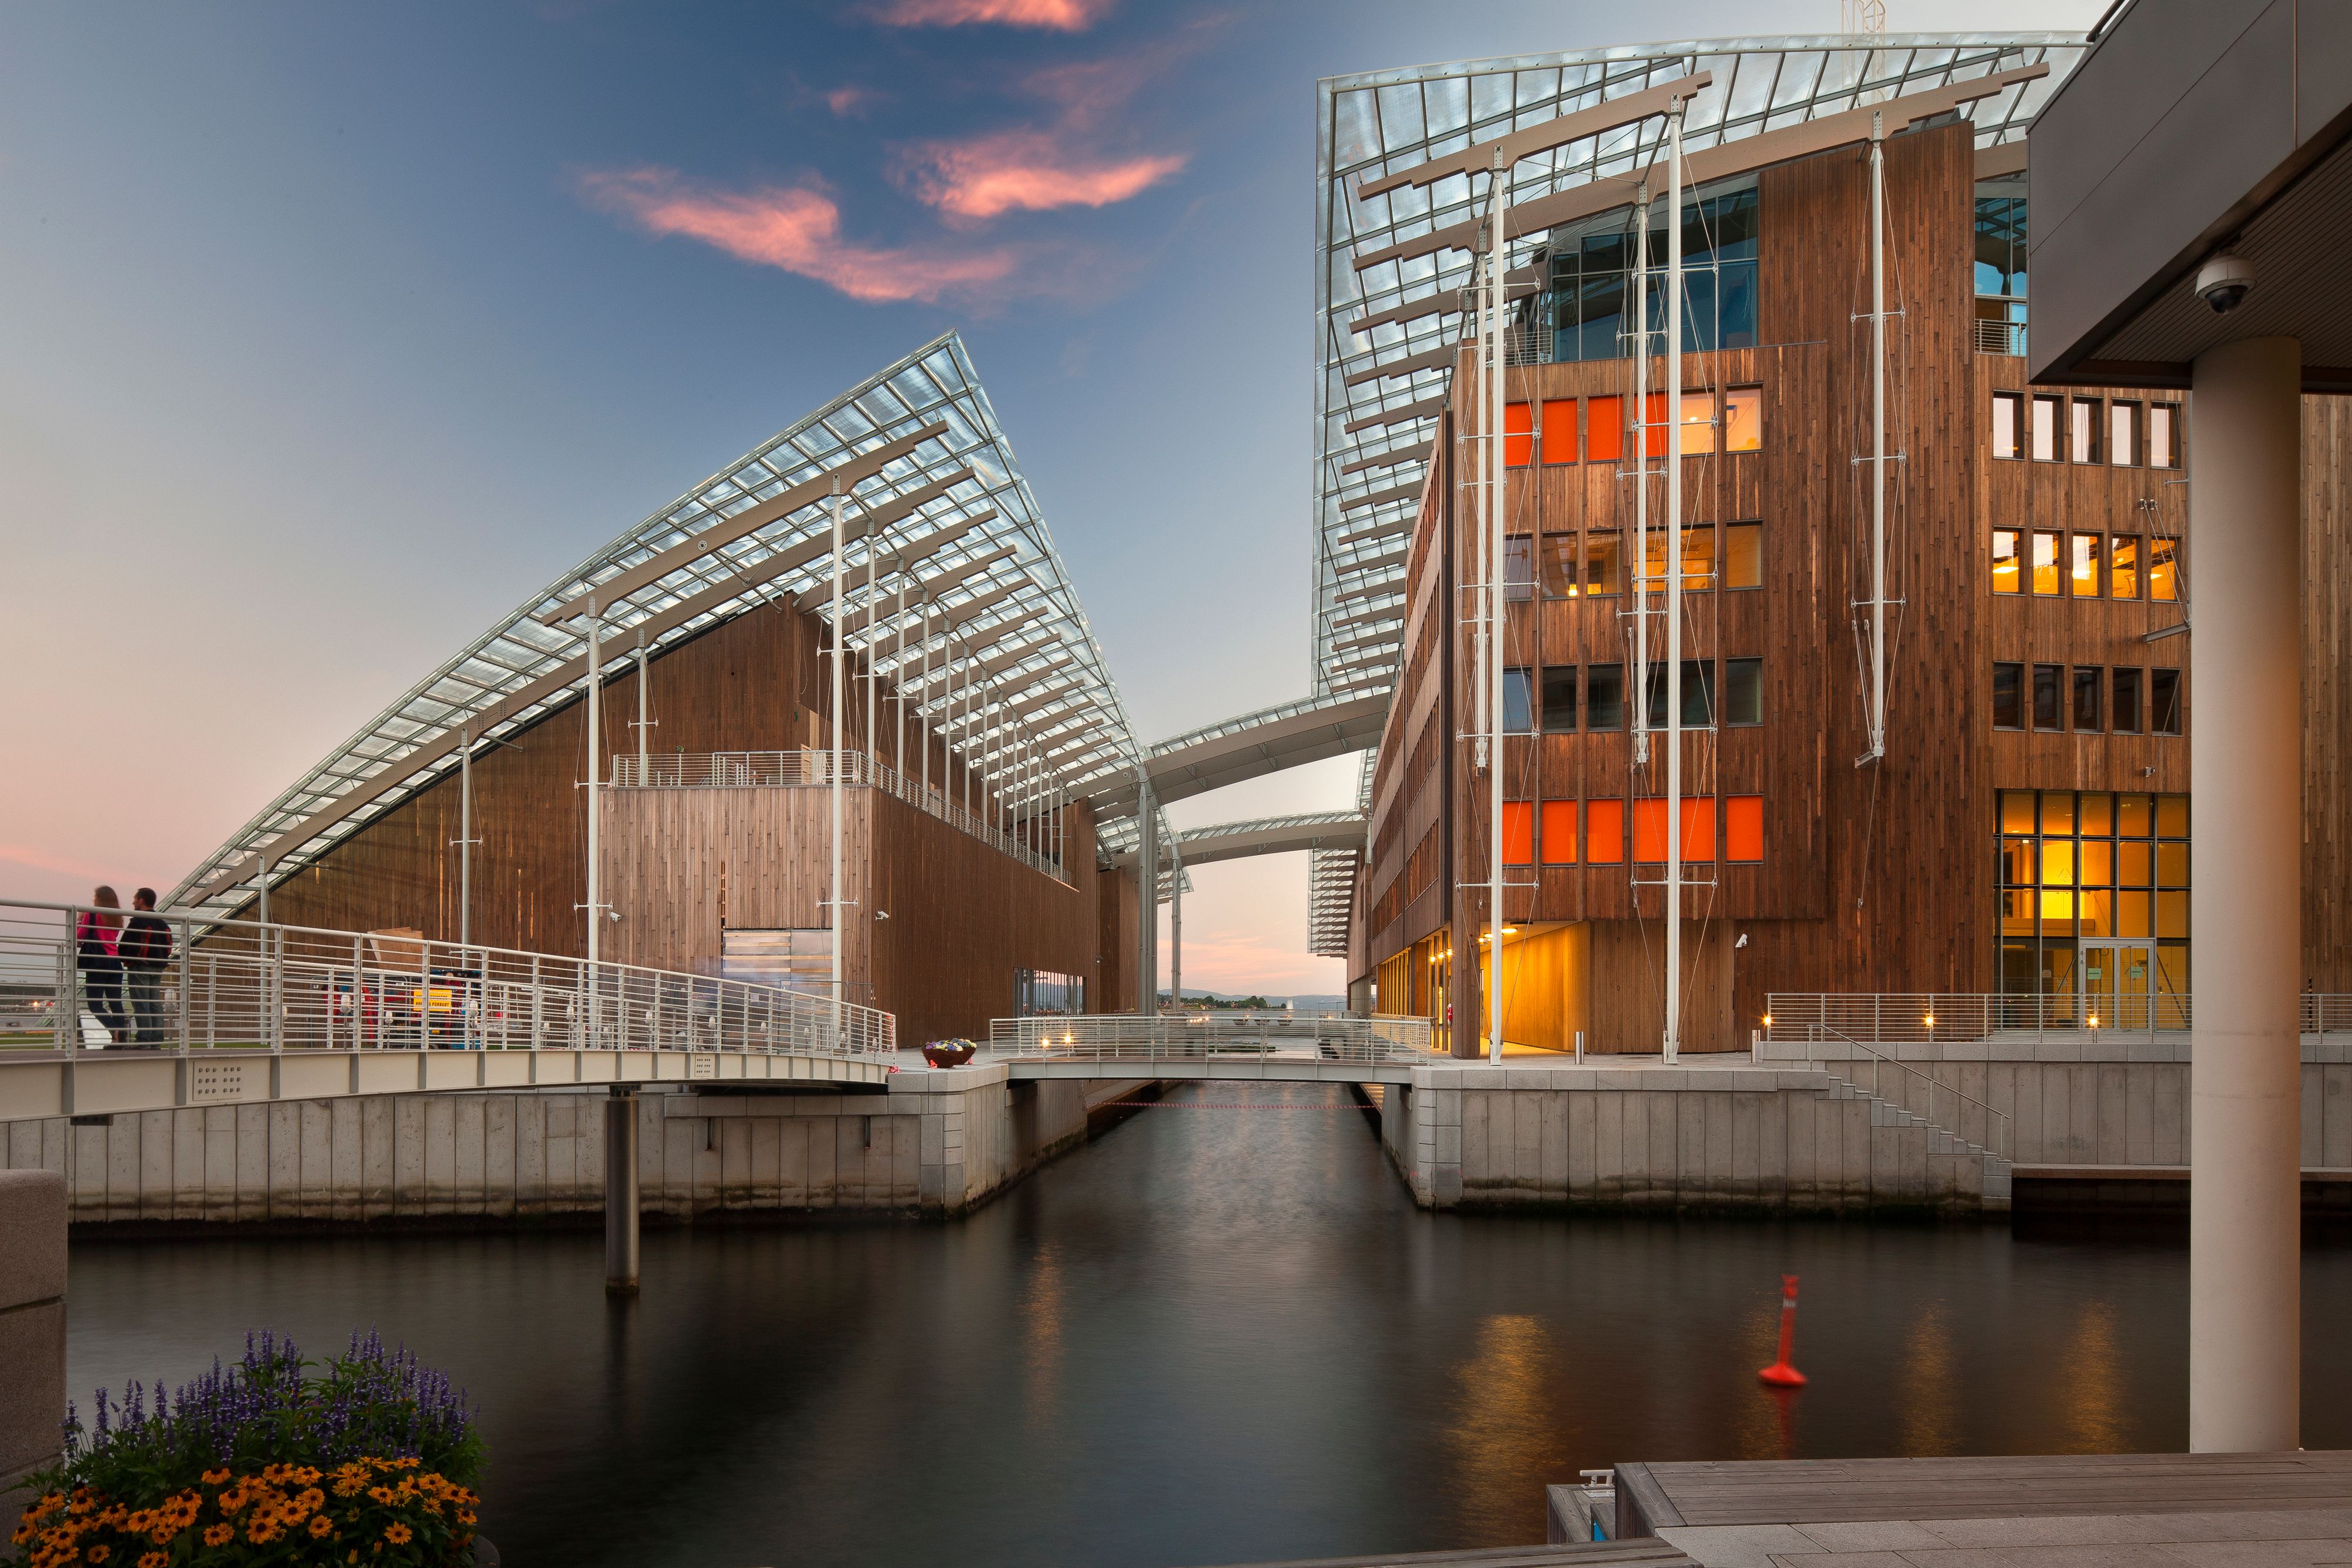 Astrup Fearnley Museum of Contemporary Art